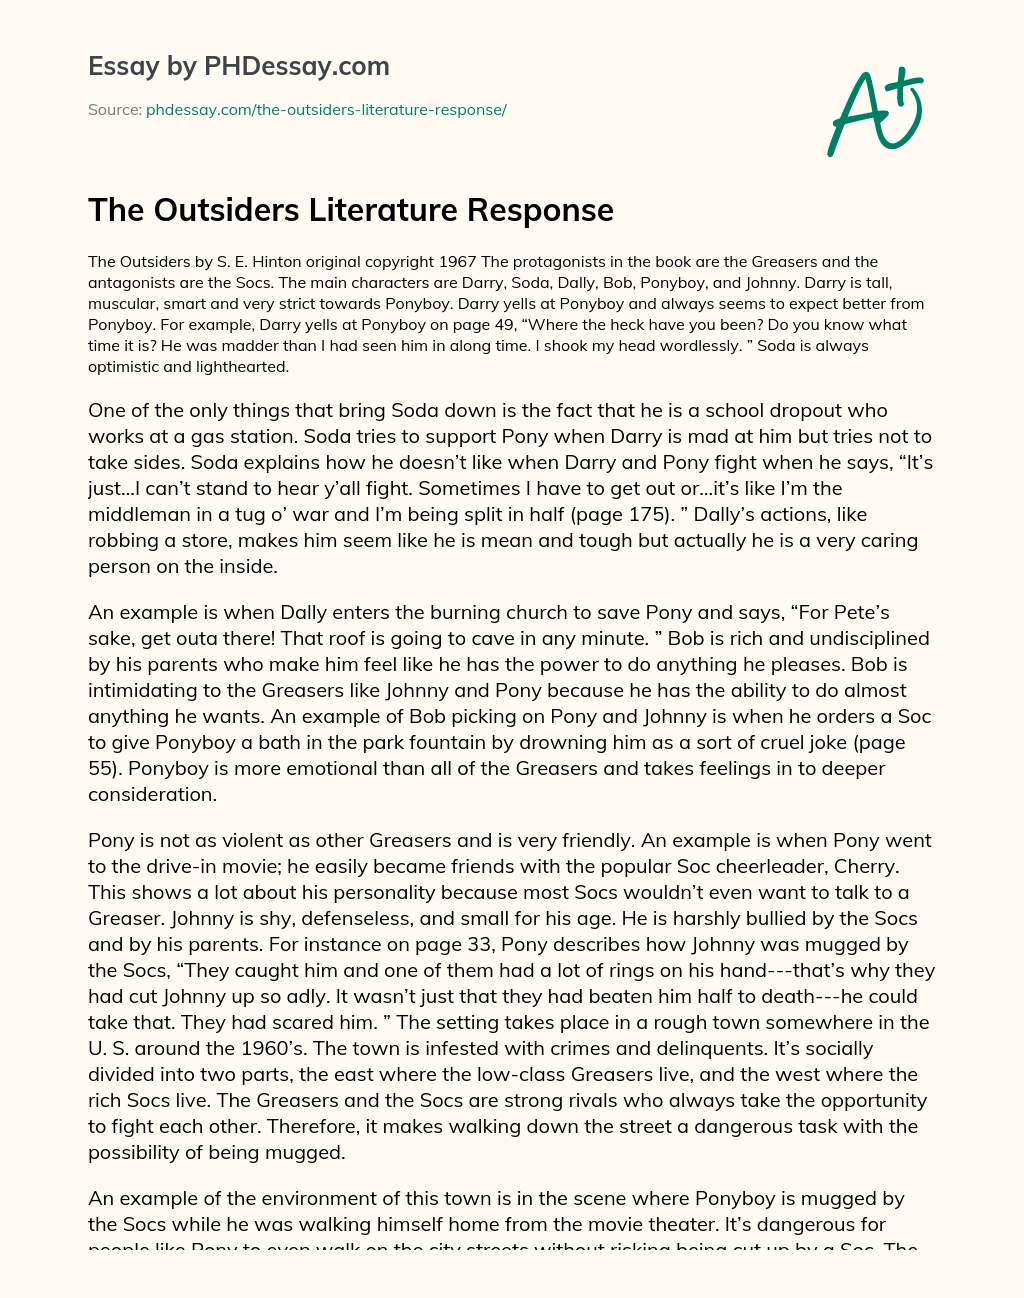 The Outsiders Literature Response essay